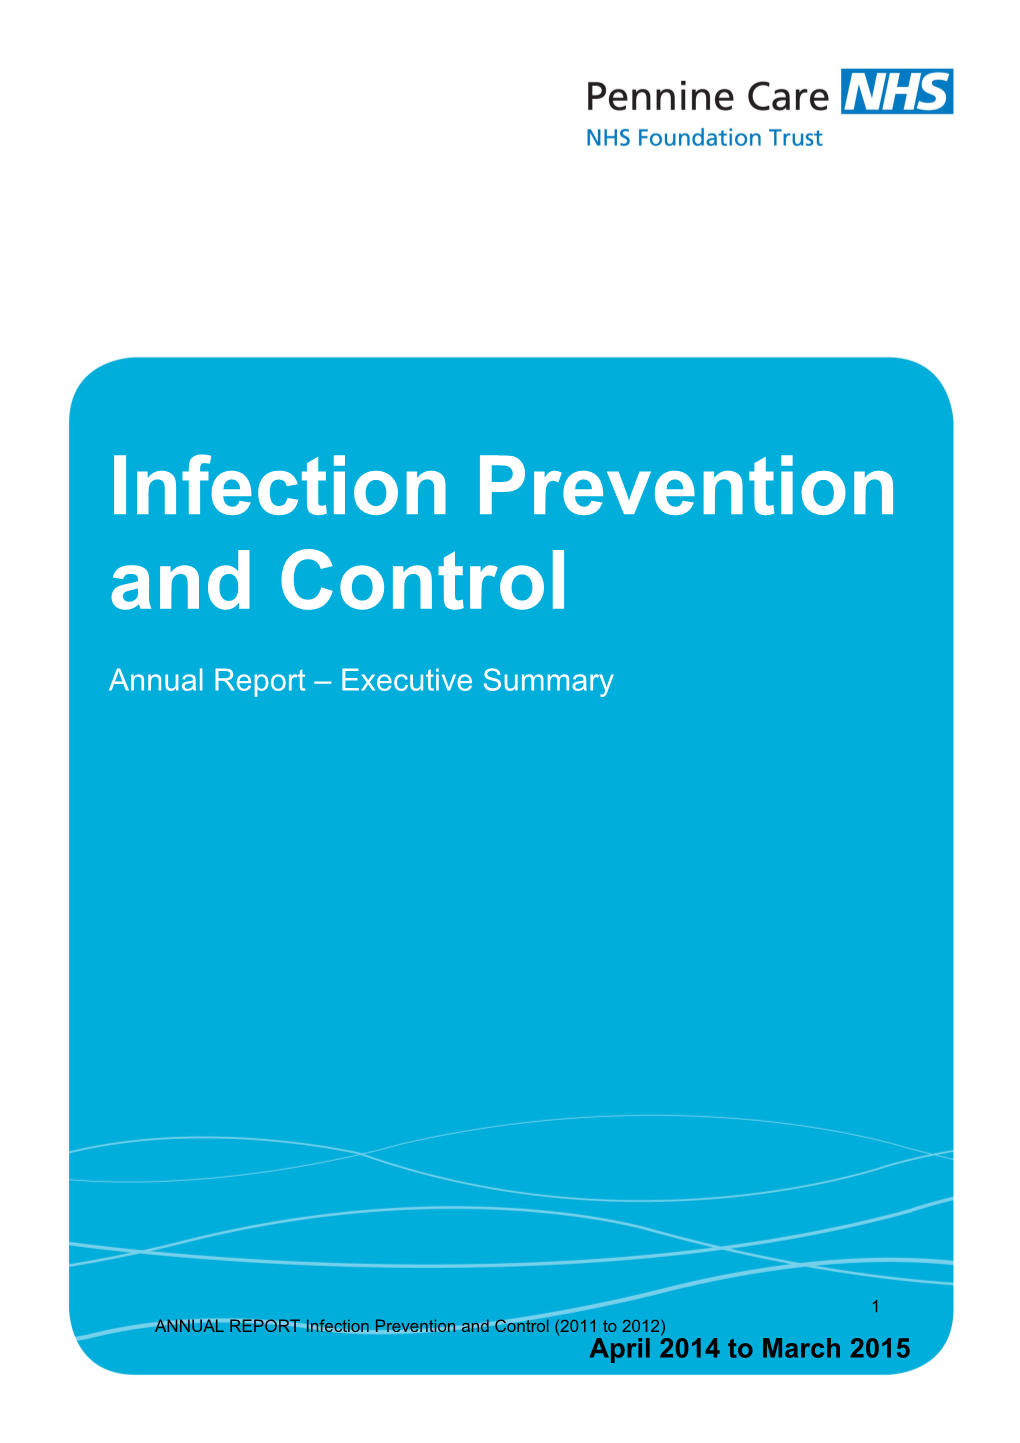 ANNUAL REPORT Infection Prevention and Control (2011 to 2012)